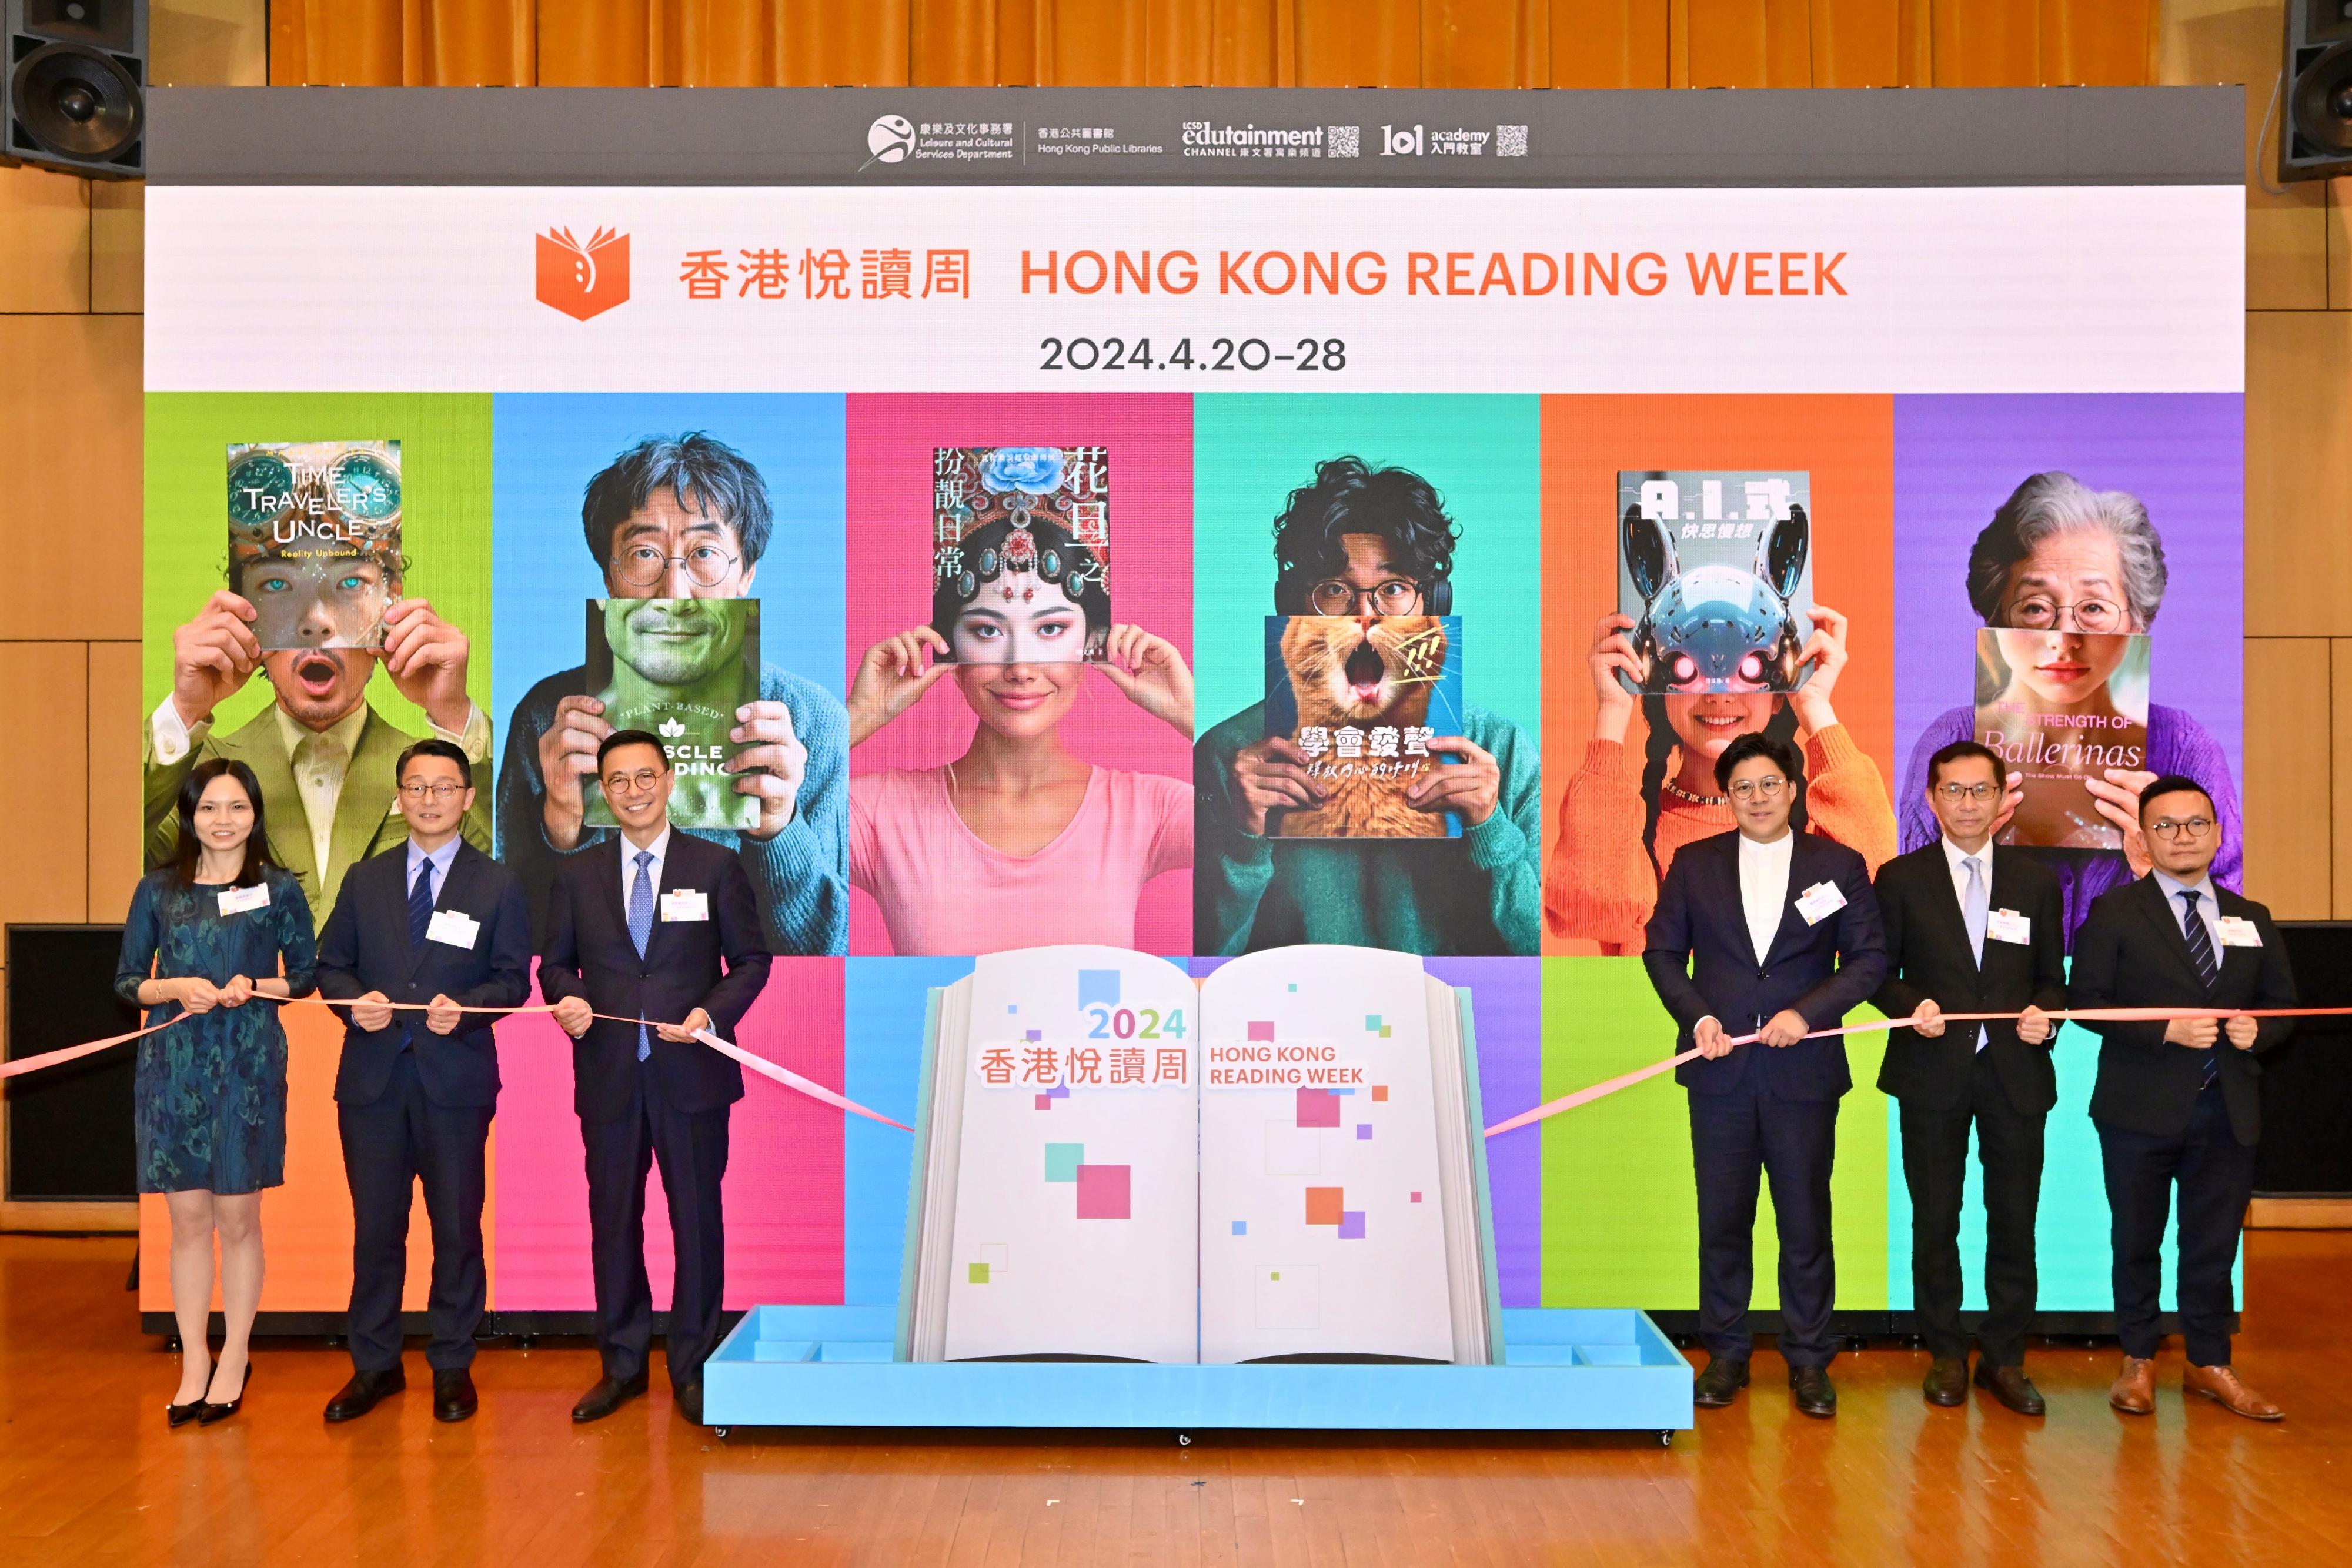 To tie in with the first Hong Kong Reading for All Day to be held on April 23, the Hong Kong Public Libraries of the Leisure and Cultural Services Department will join hands with various stakeholders to organise the first Hong Kong Reading Week from April 20 to 28. Photo shows the Secretary for Culture, Sports and Tourism, Mr Kevin Yeung (third left); Member of the Legislative Council, Mr Kenneth Fok (third right); the Director of Leisure and Cultural Services, Mr Vincent Liu (second left); the Deputy Director of Broadcasting, Ms Christine Wai (first left); the Acting Head of Create Hong Kong, Mr Gary Mak (first right); and the President of the Hong Kong Publishing Federation, Dr Elvin Lee (second right), officiating at the opening ceremony of Hong Kong Reading Week today (April 9).